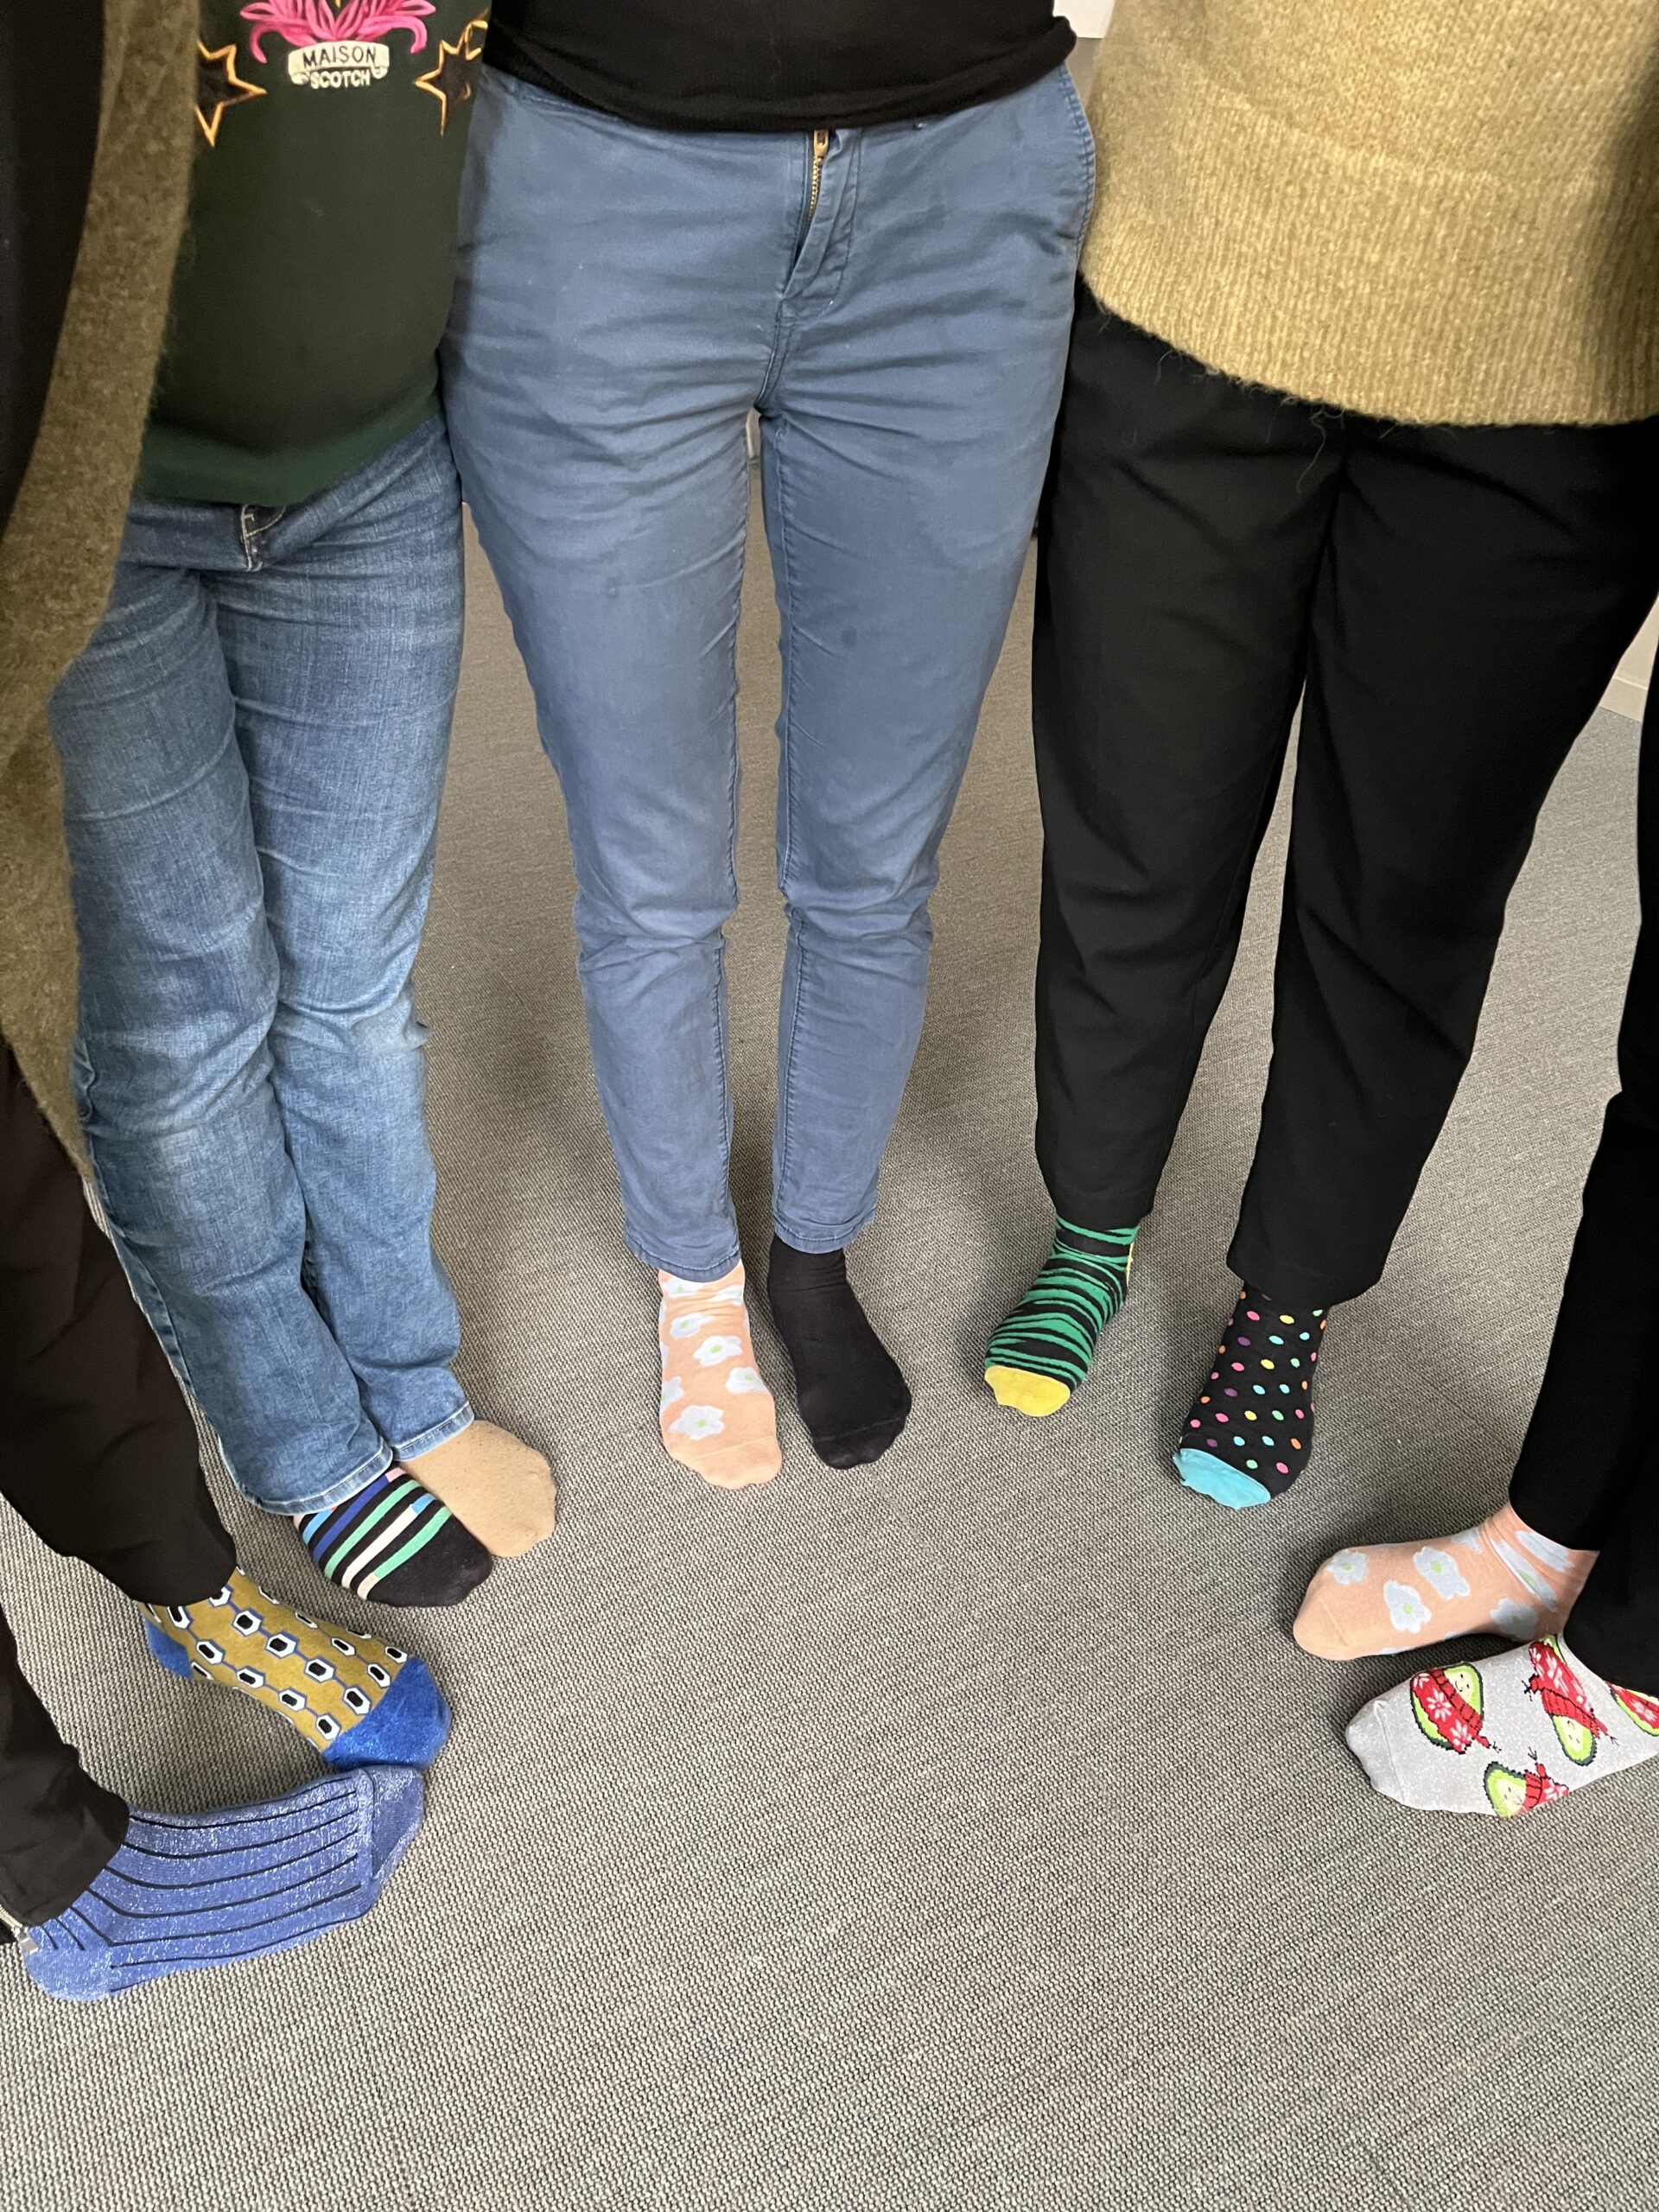 People wearing mismatched socks in different colours.